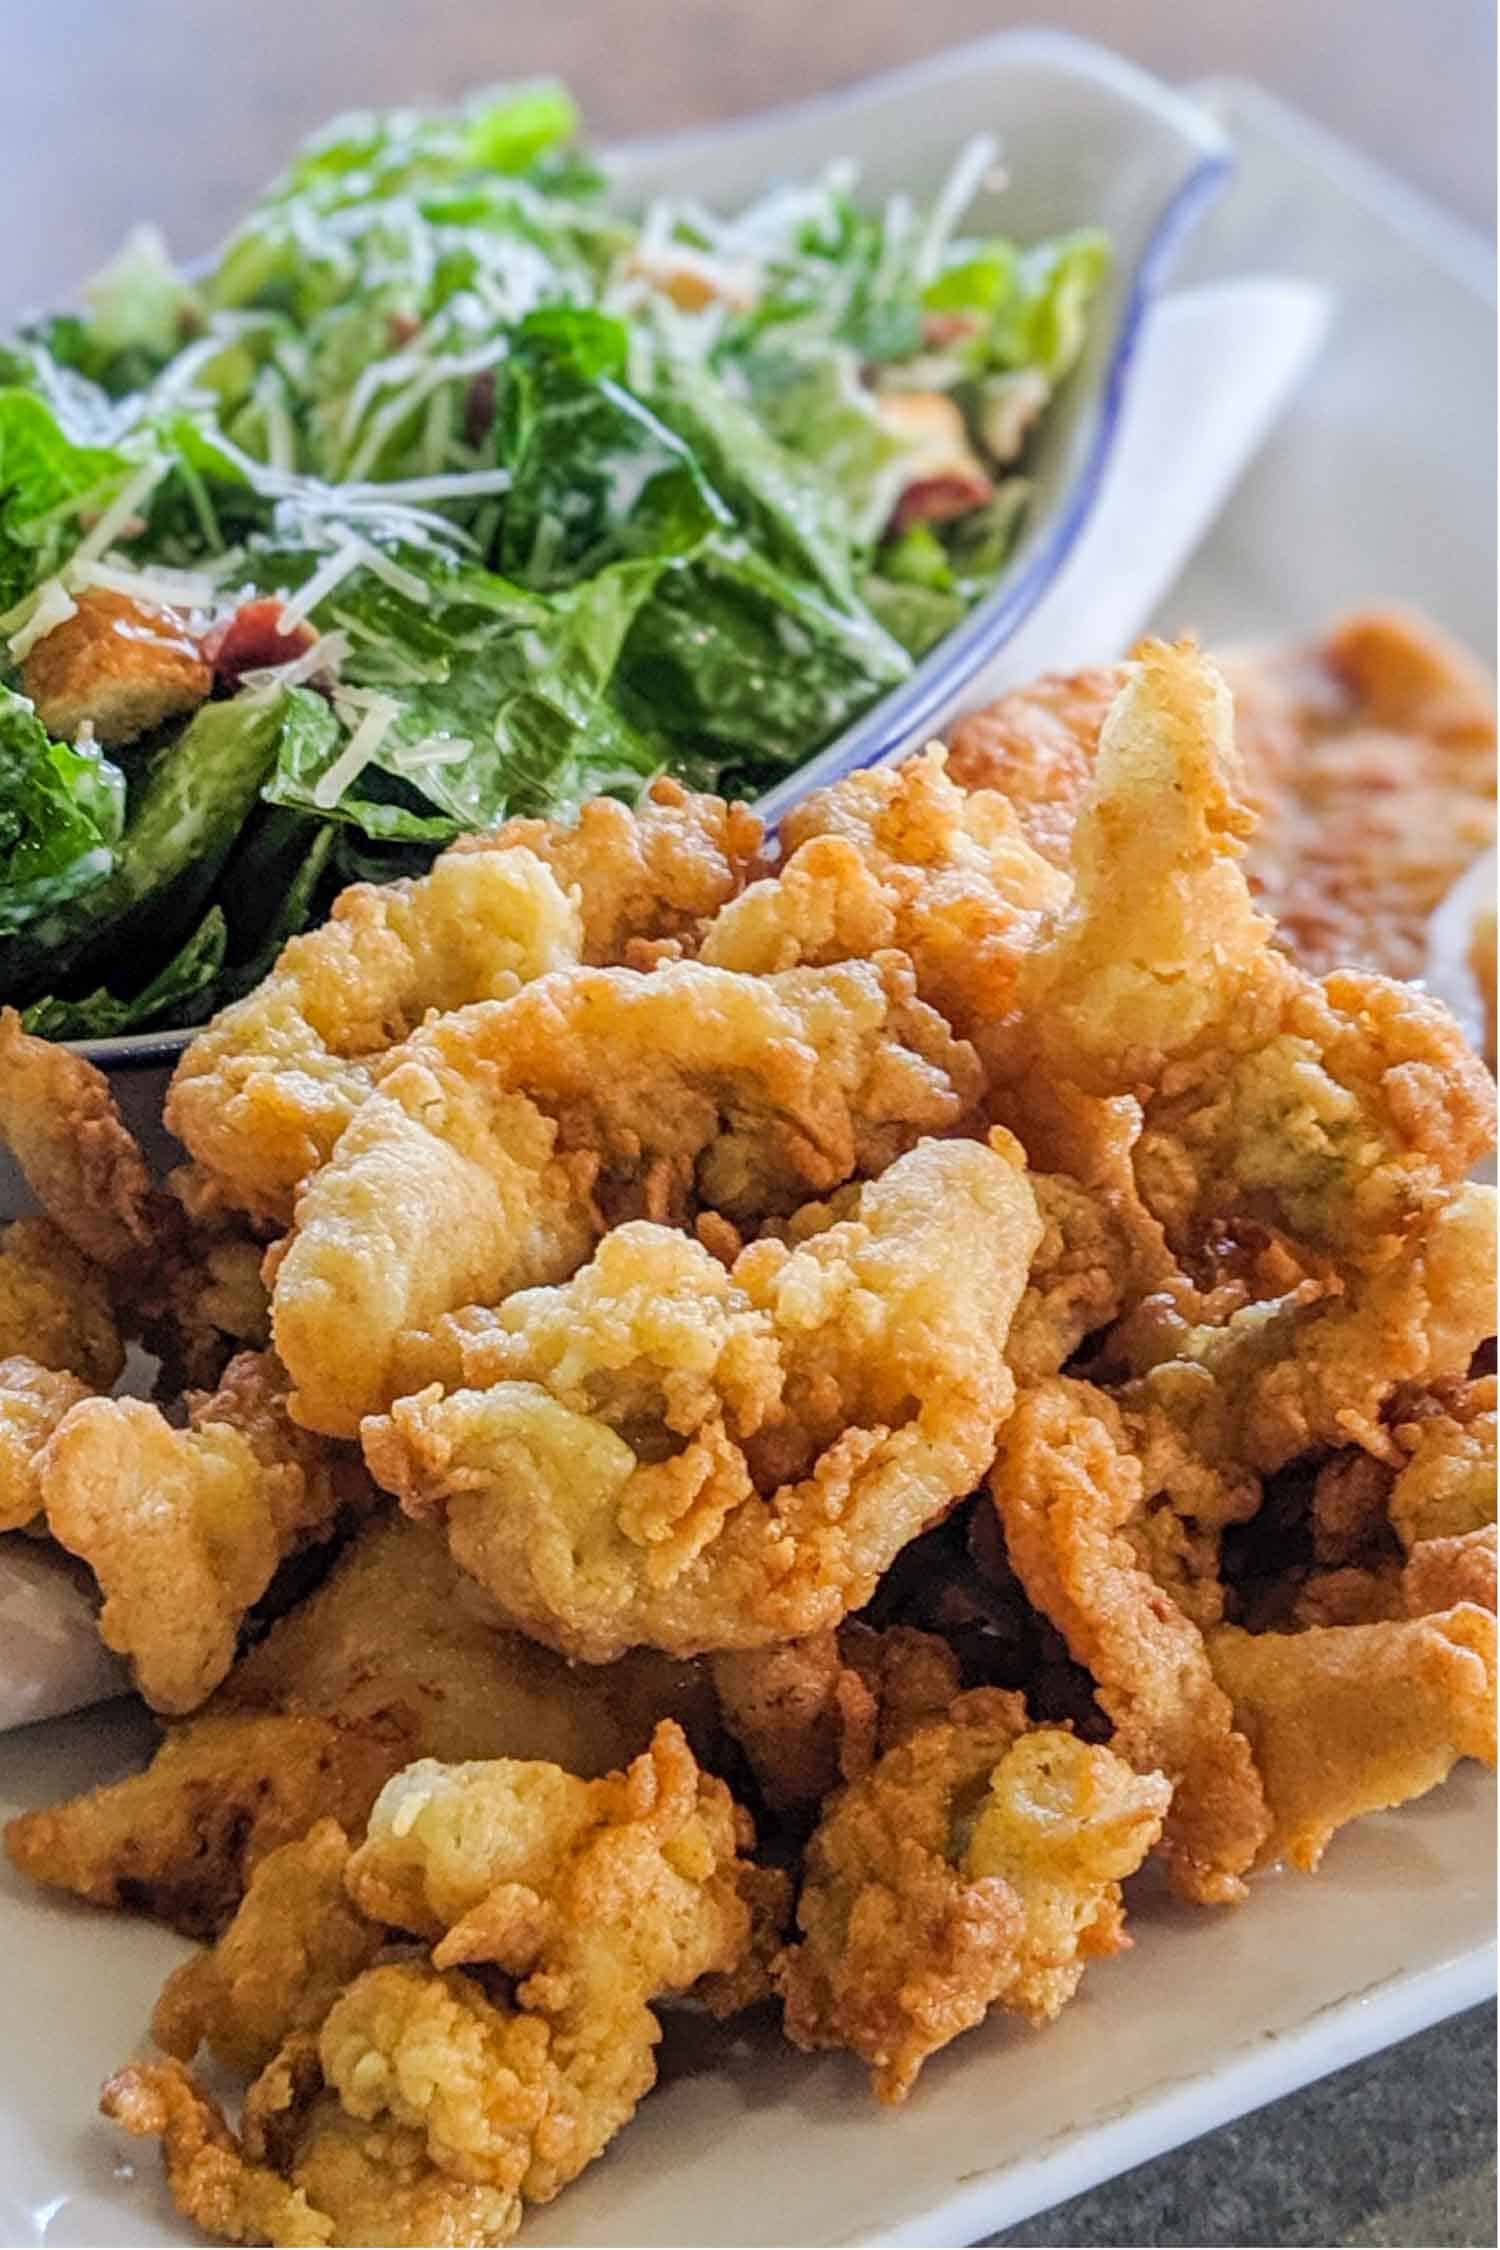 Fried clam strip and cesar salad